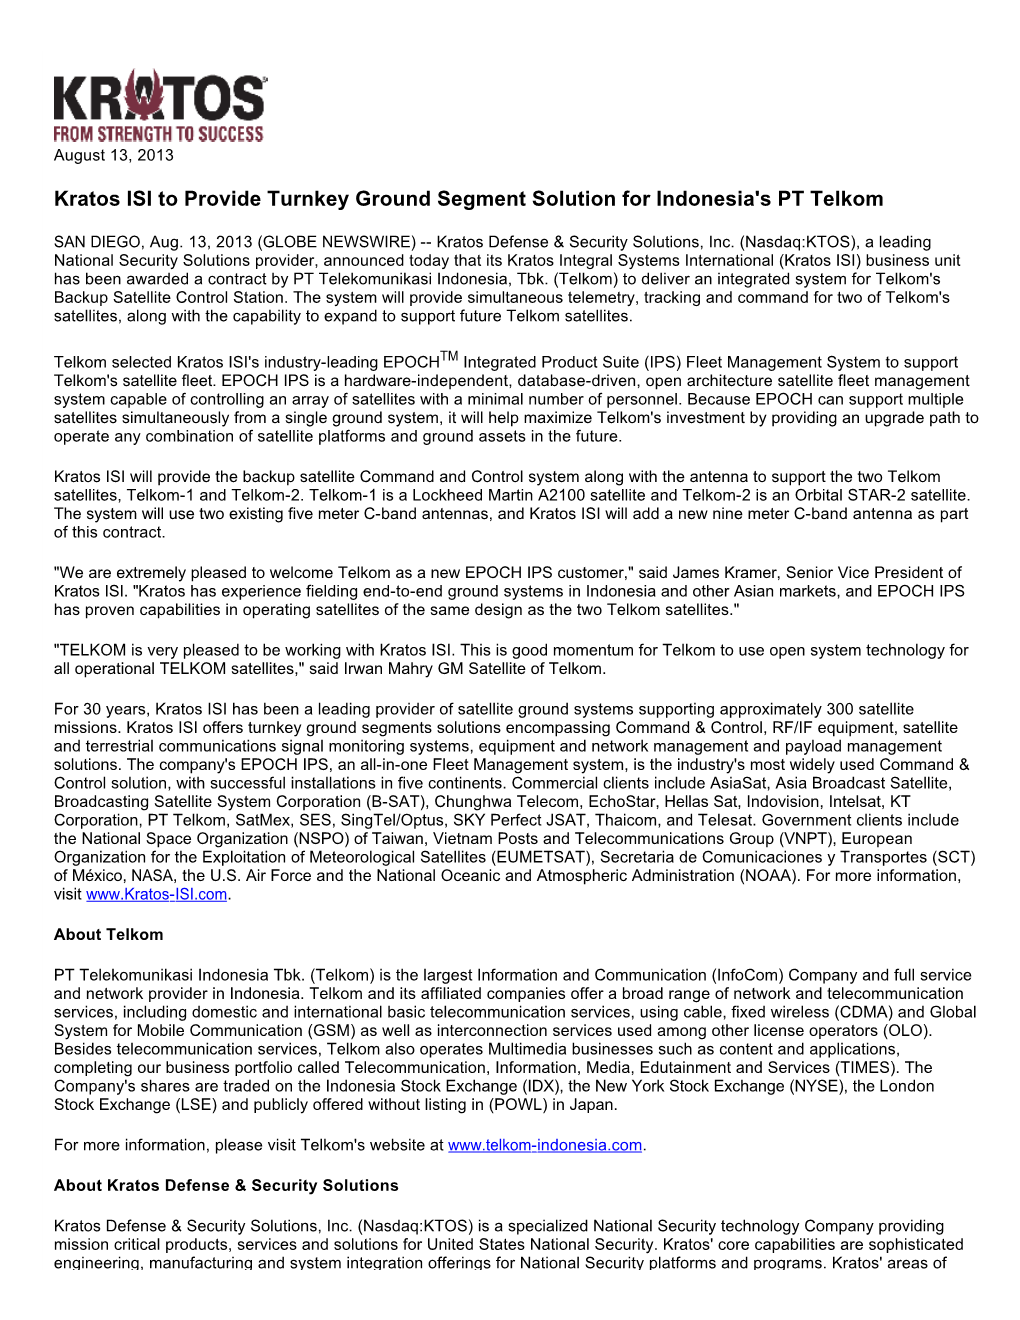 Kratos ISI to Provide Turnkey Ground Segment Solution for Indonesia's PT Telkom